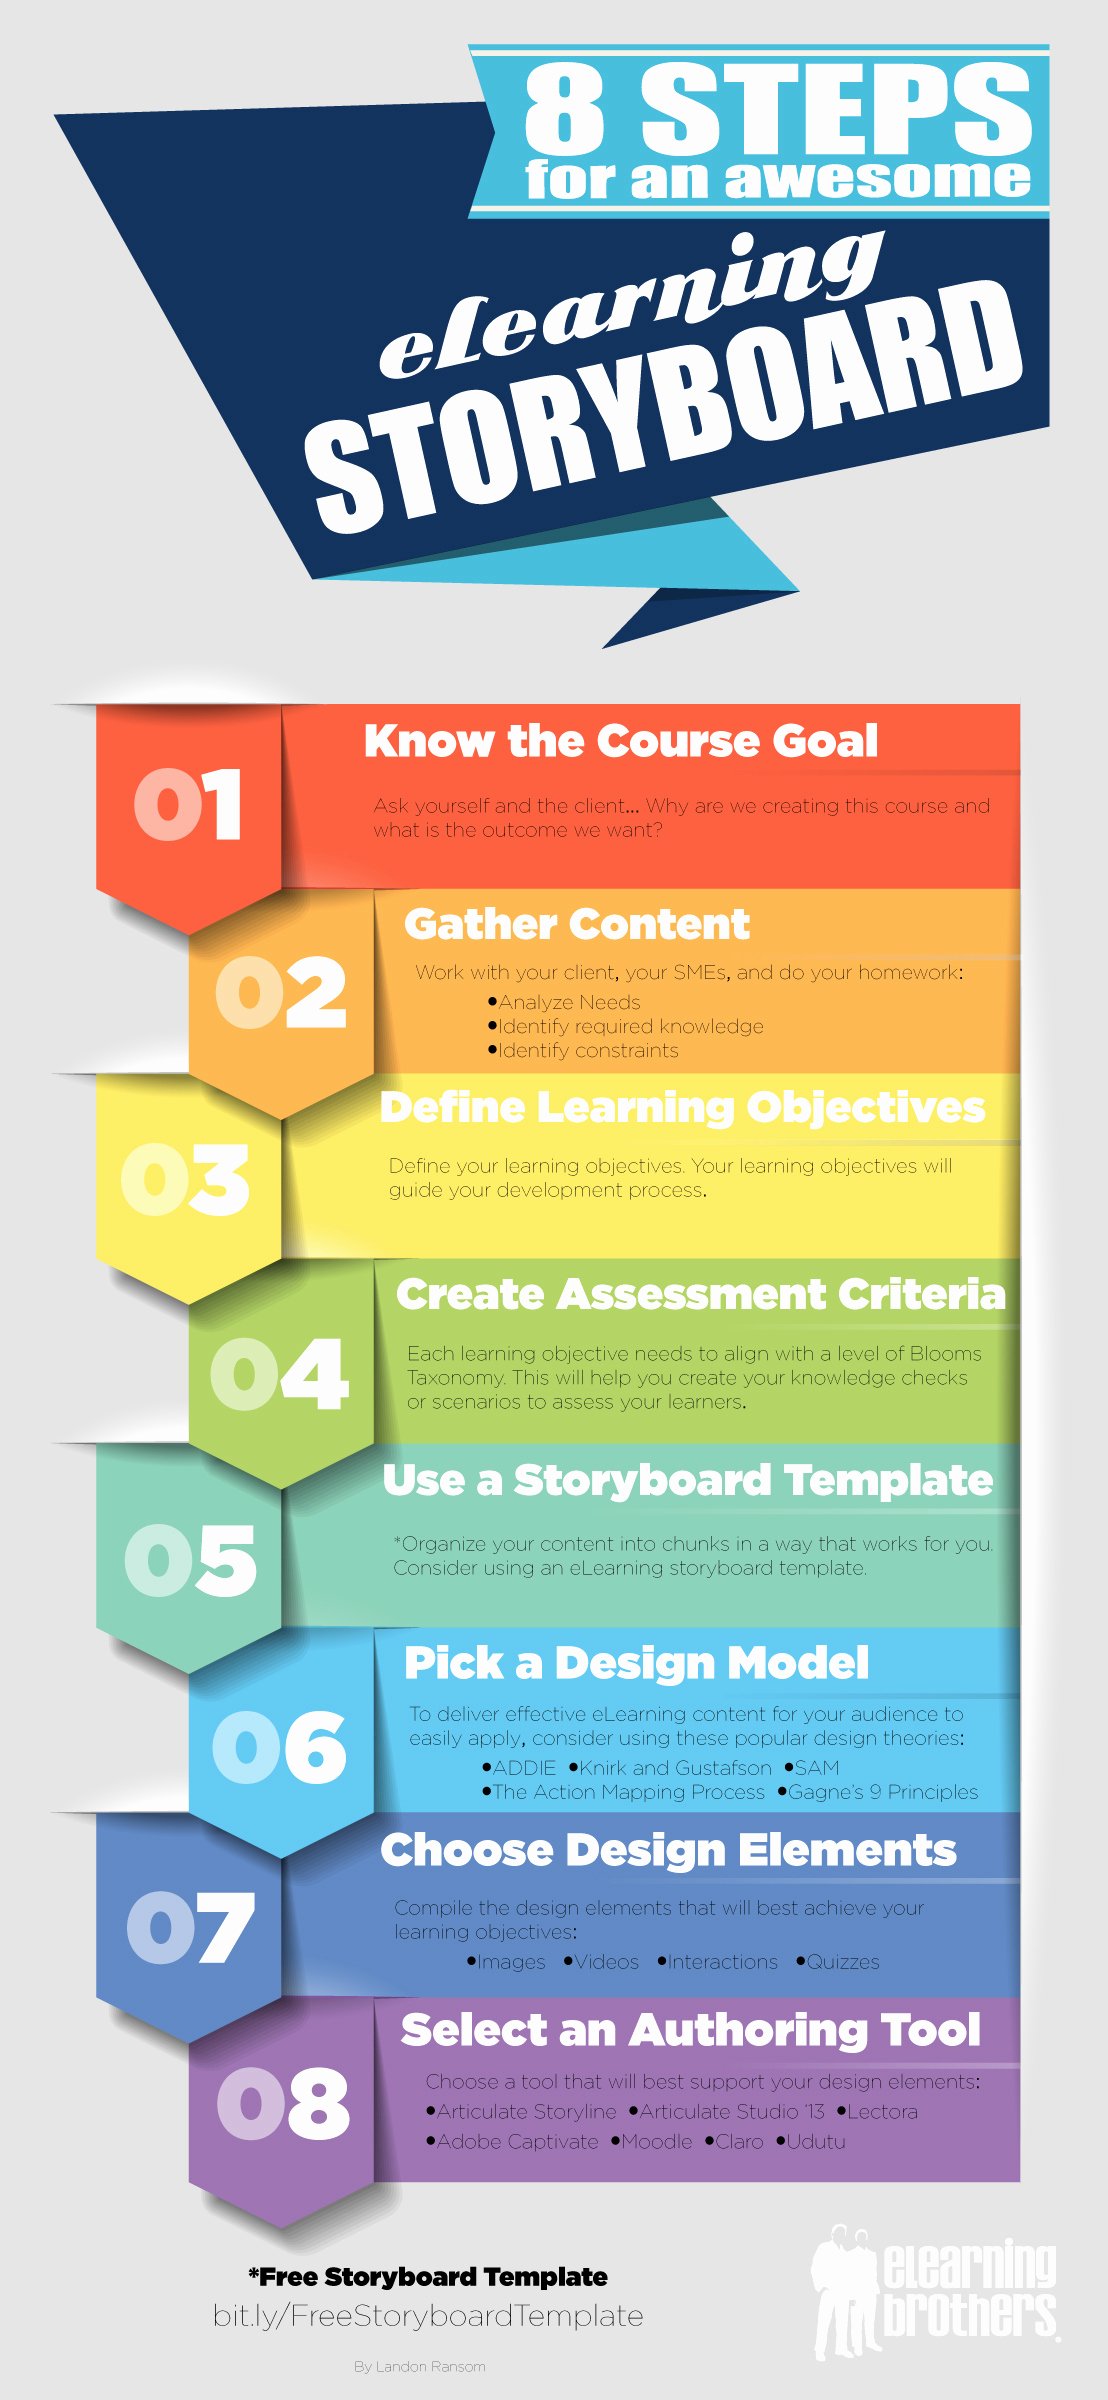 Captivate Storyboard Template Inspirational 8 Steps for An Awesome Elearning Storyboard Elearning